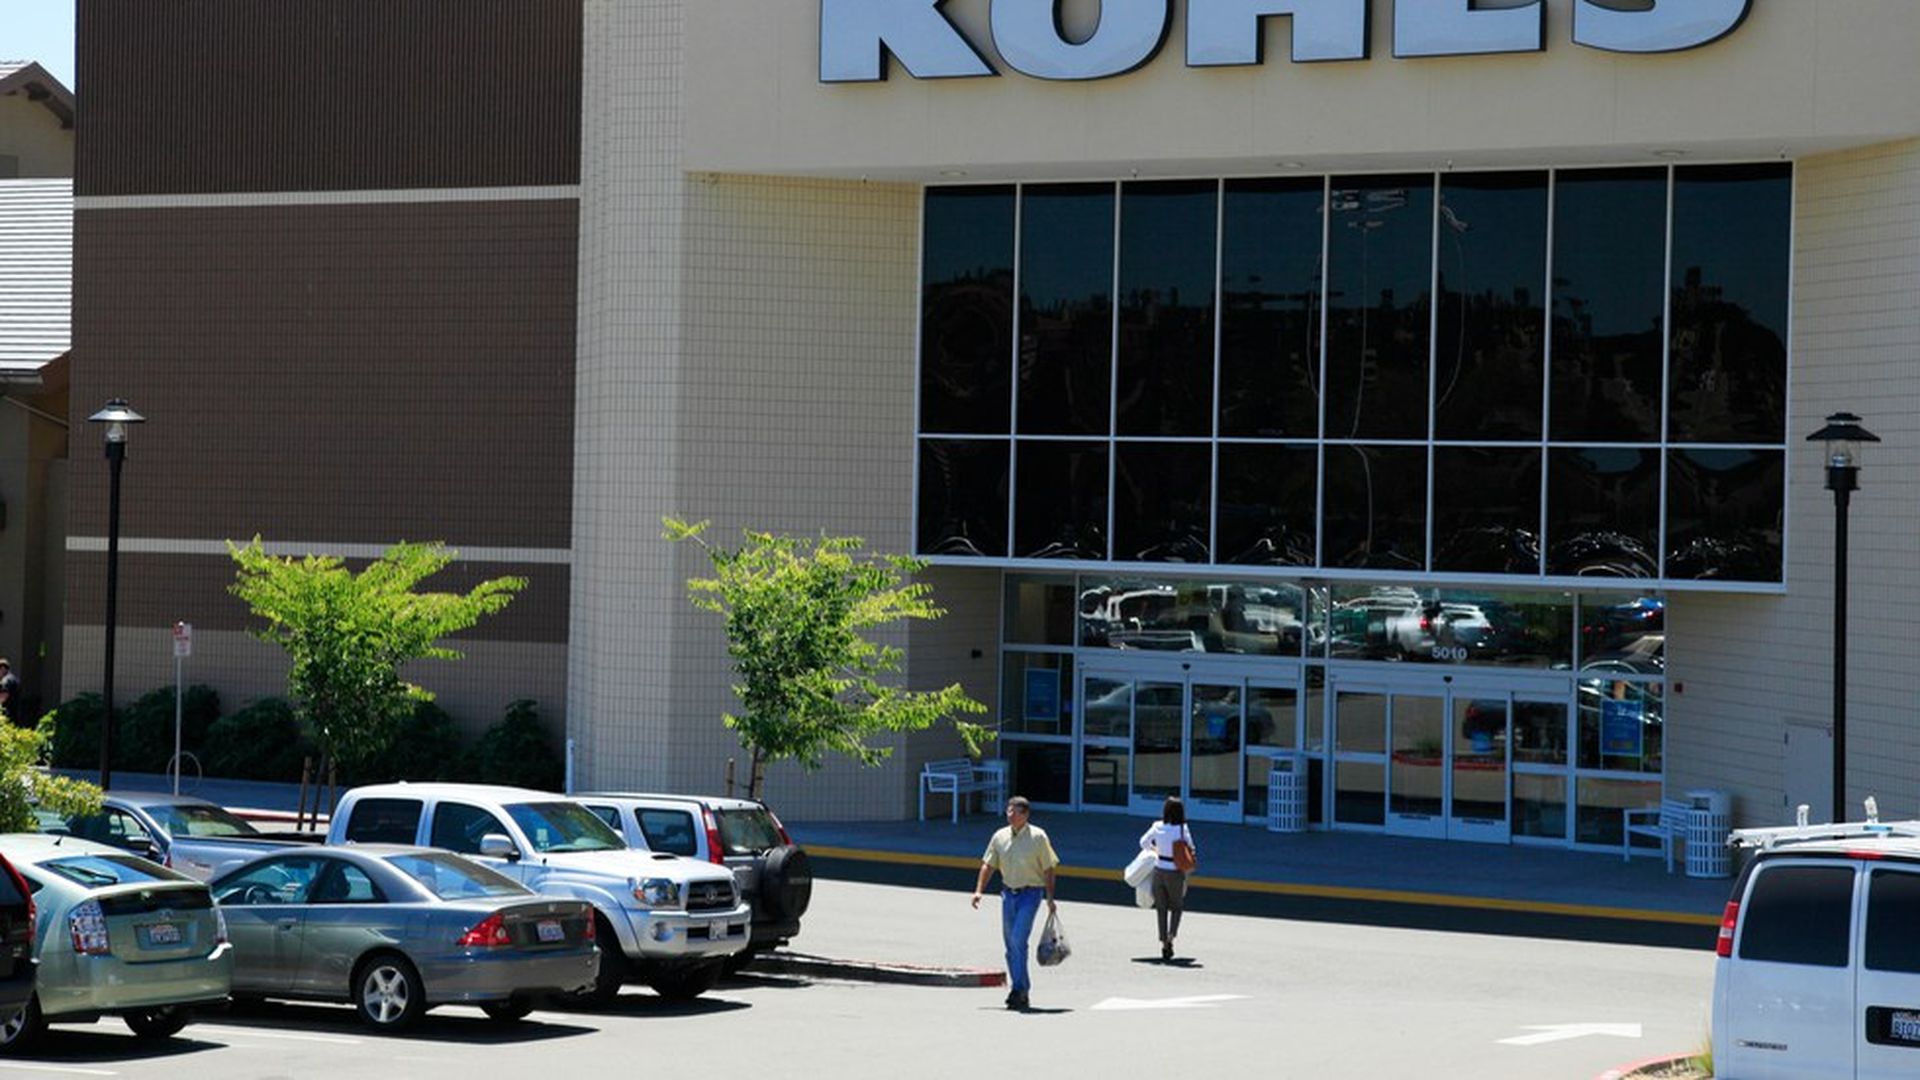 See photos: Kohl's downtown store opens